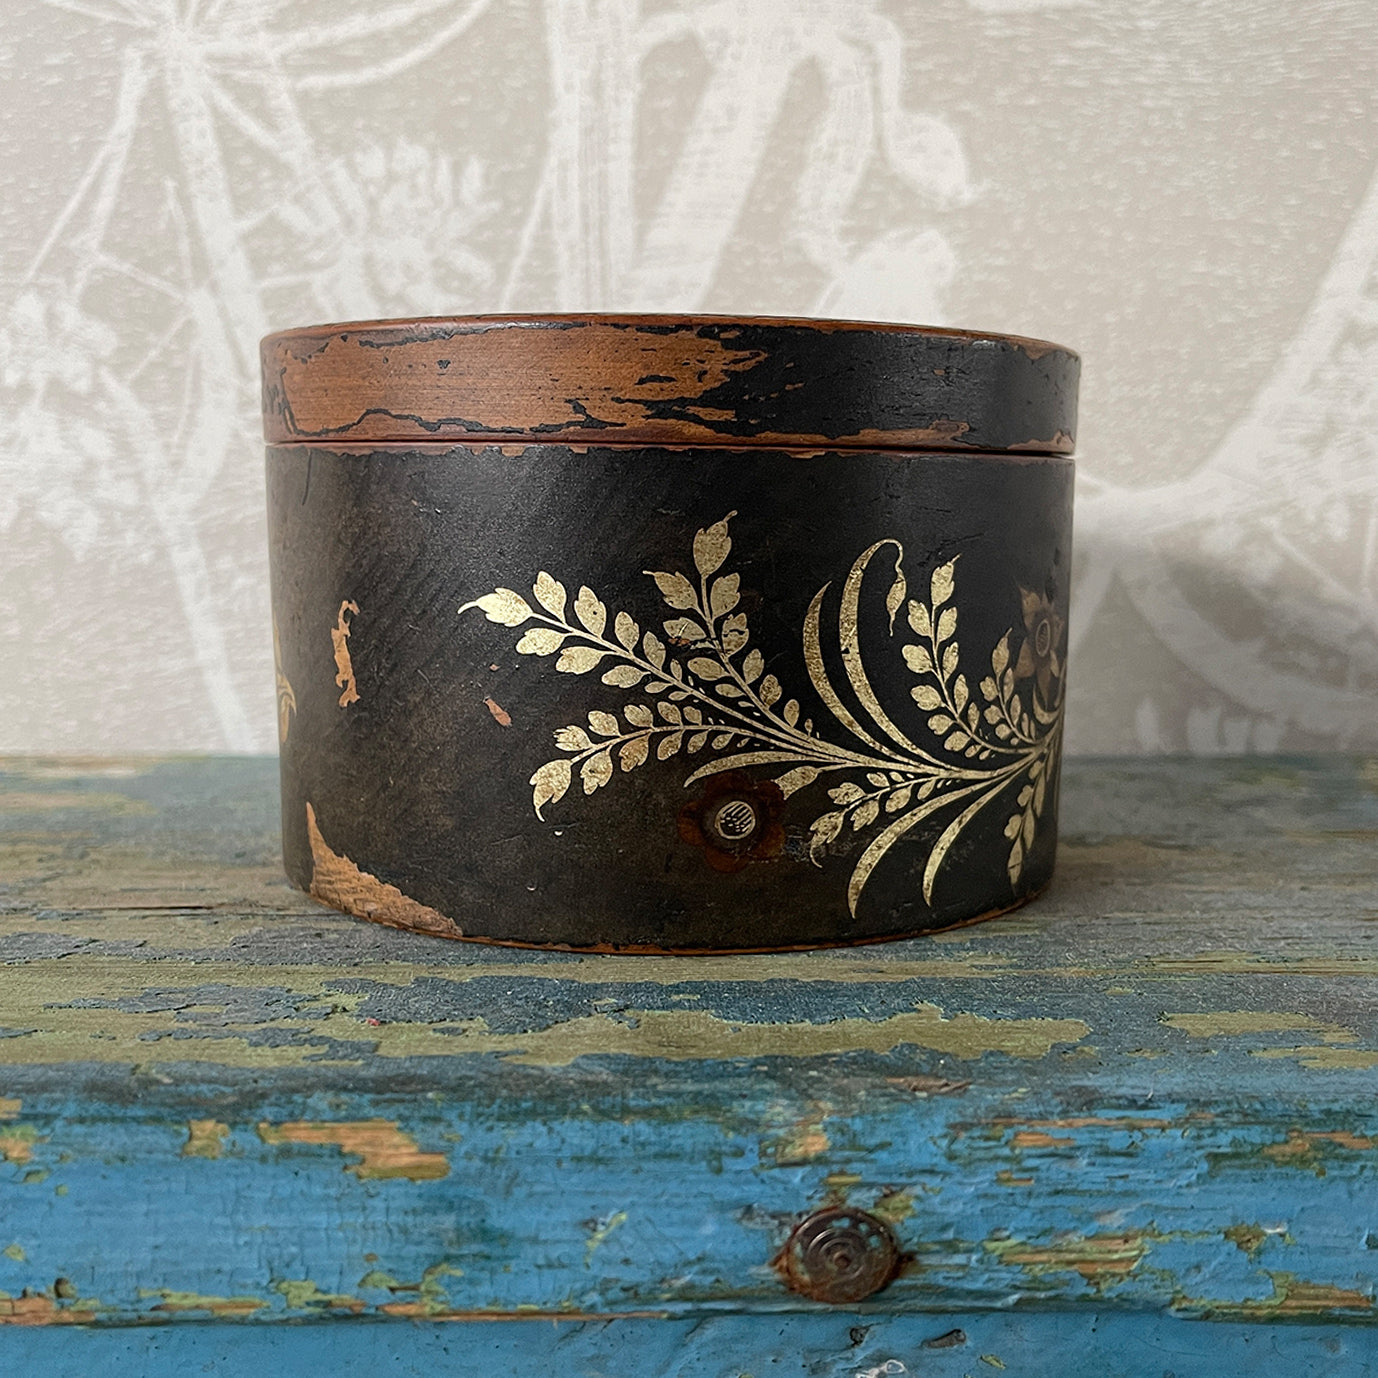 A delightful Oriental wooden Trinket box with lid. Decorated with a Pagoda scene to the lid, with the side having a floral fern decoration. The inside sees a brick red finish with flecks of gold. Great wear to the black paint around the edges on the outside - SHOP NOW - www.intovintage.co.uk